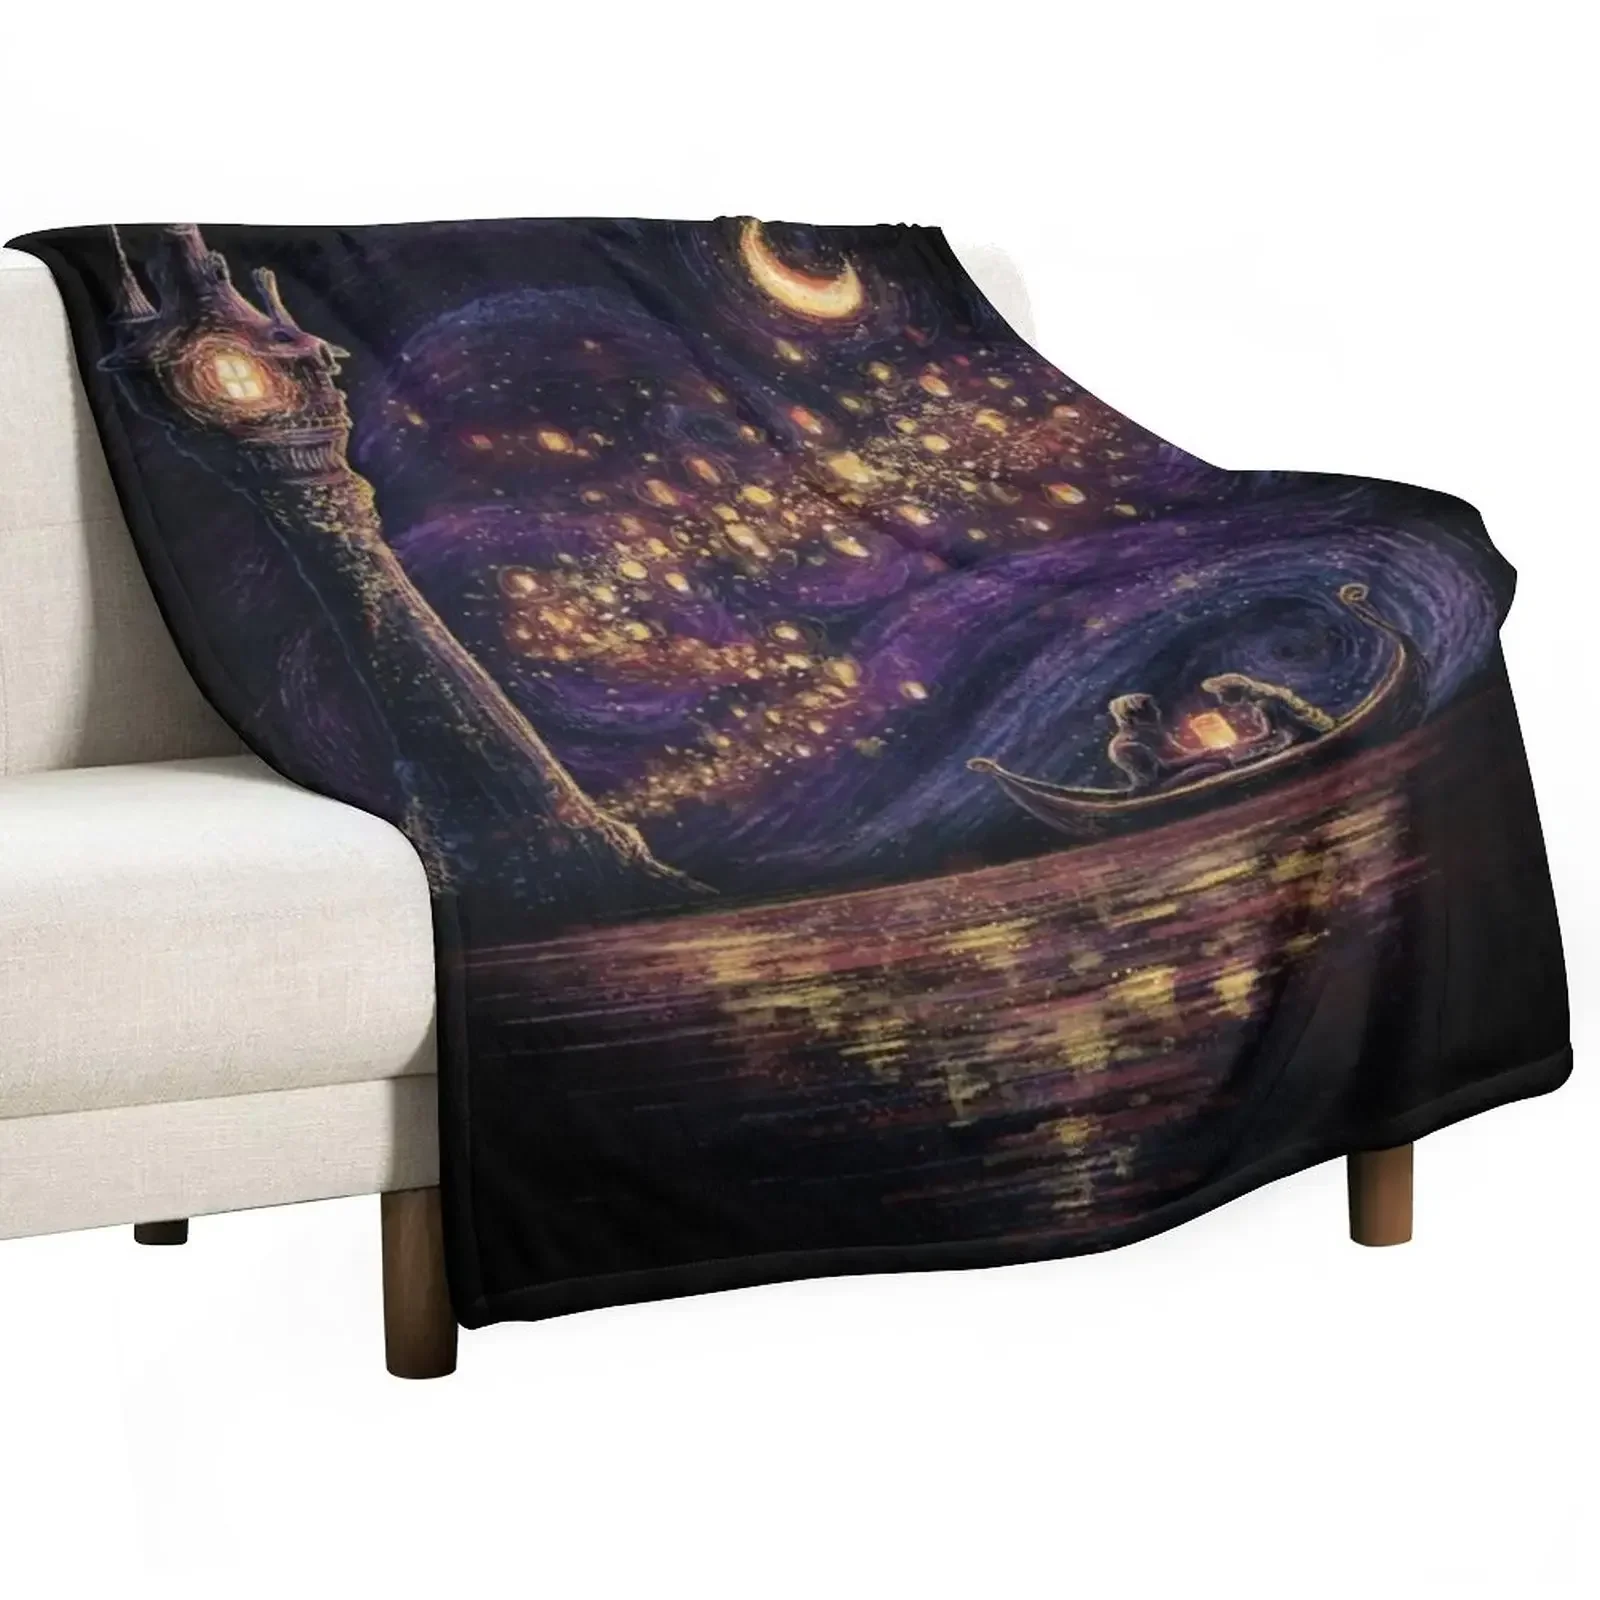 

Lanterns Of Hope Throw Blanket blankets ands For Sofa Thin Soft Beds Luxury Throw Blankets